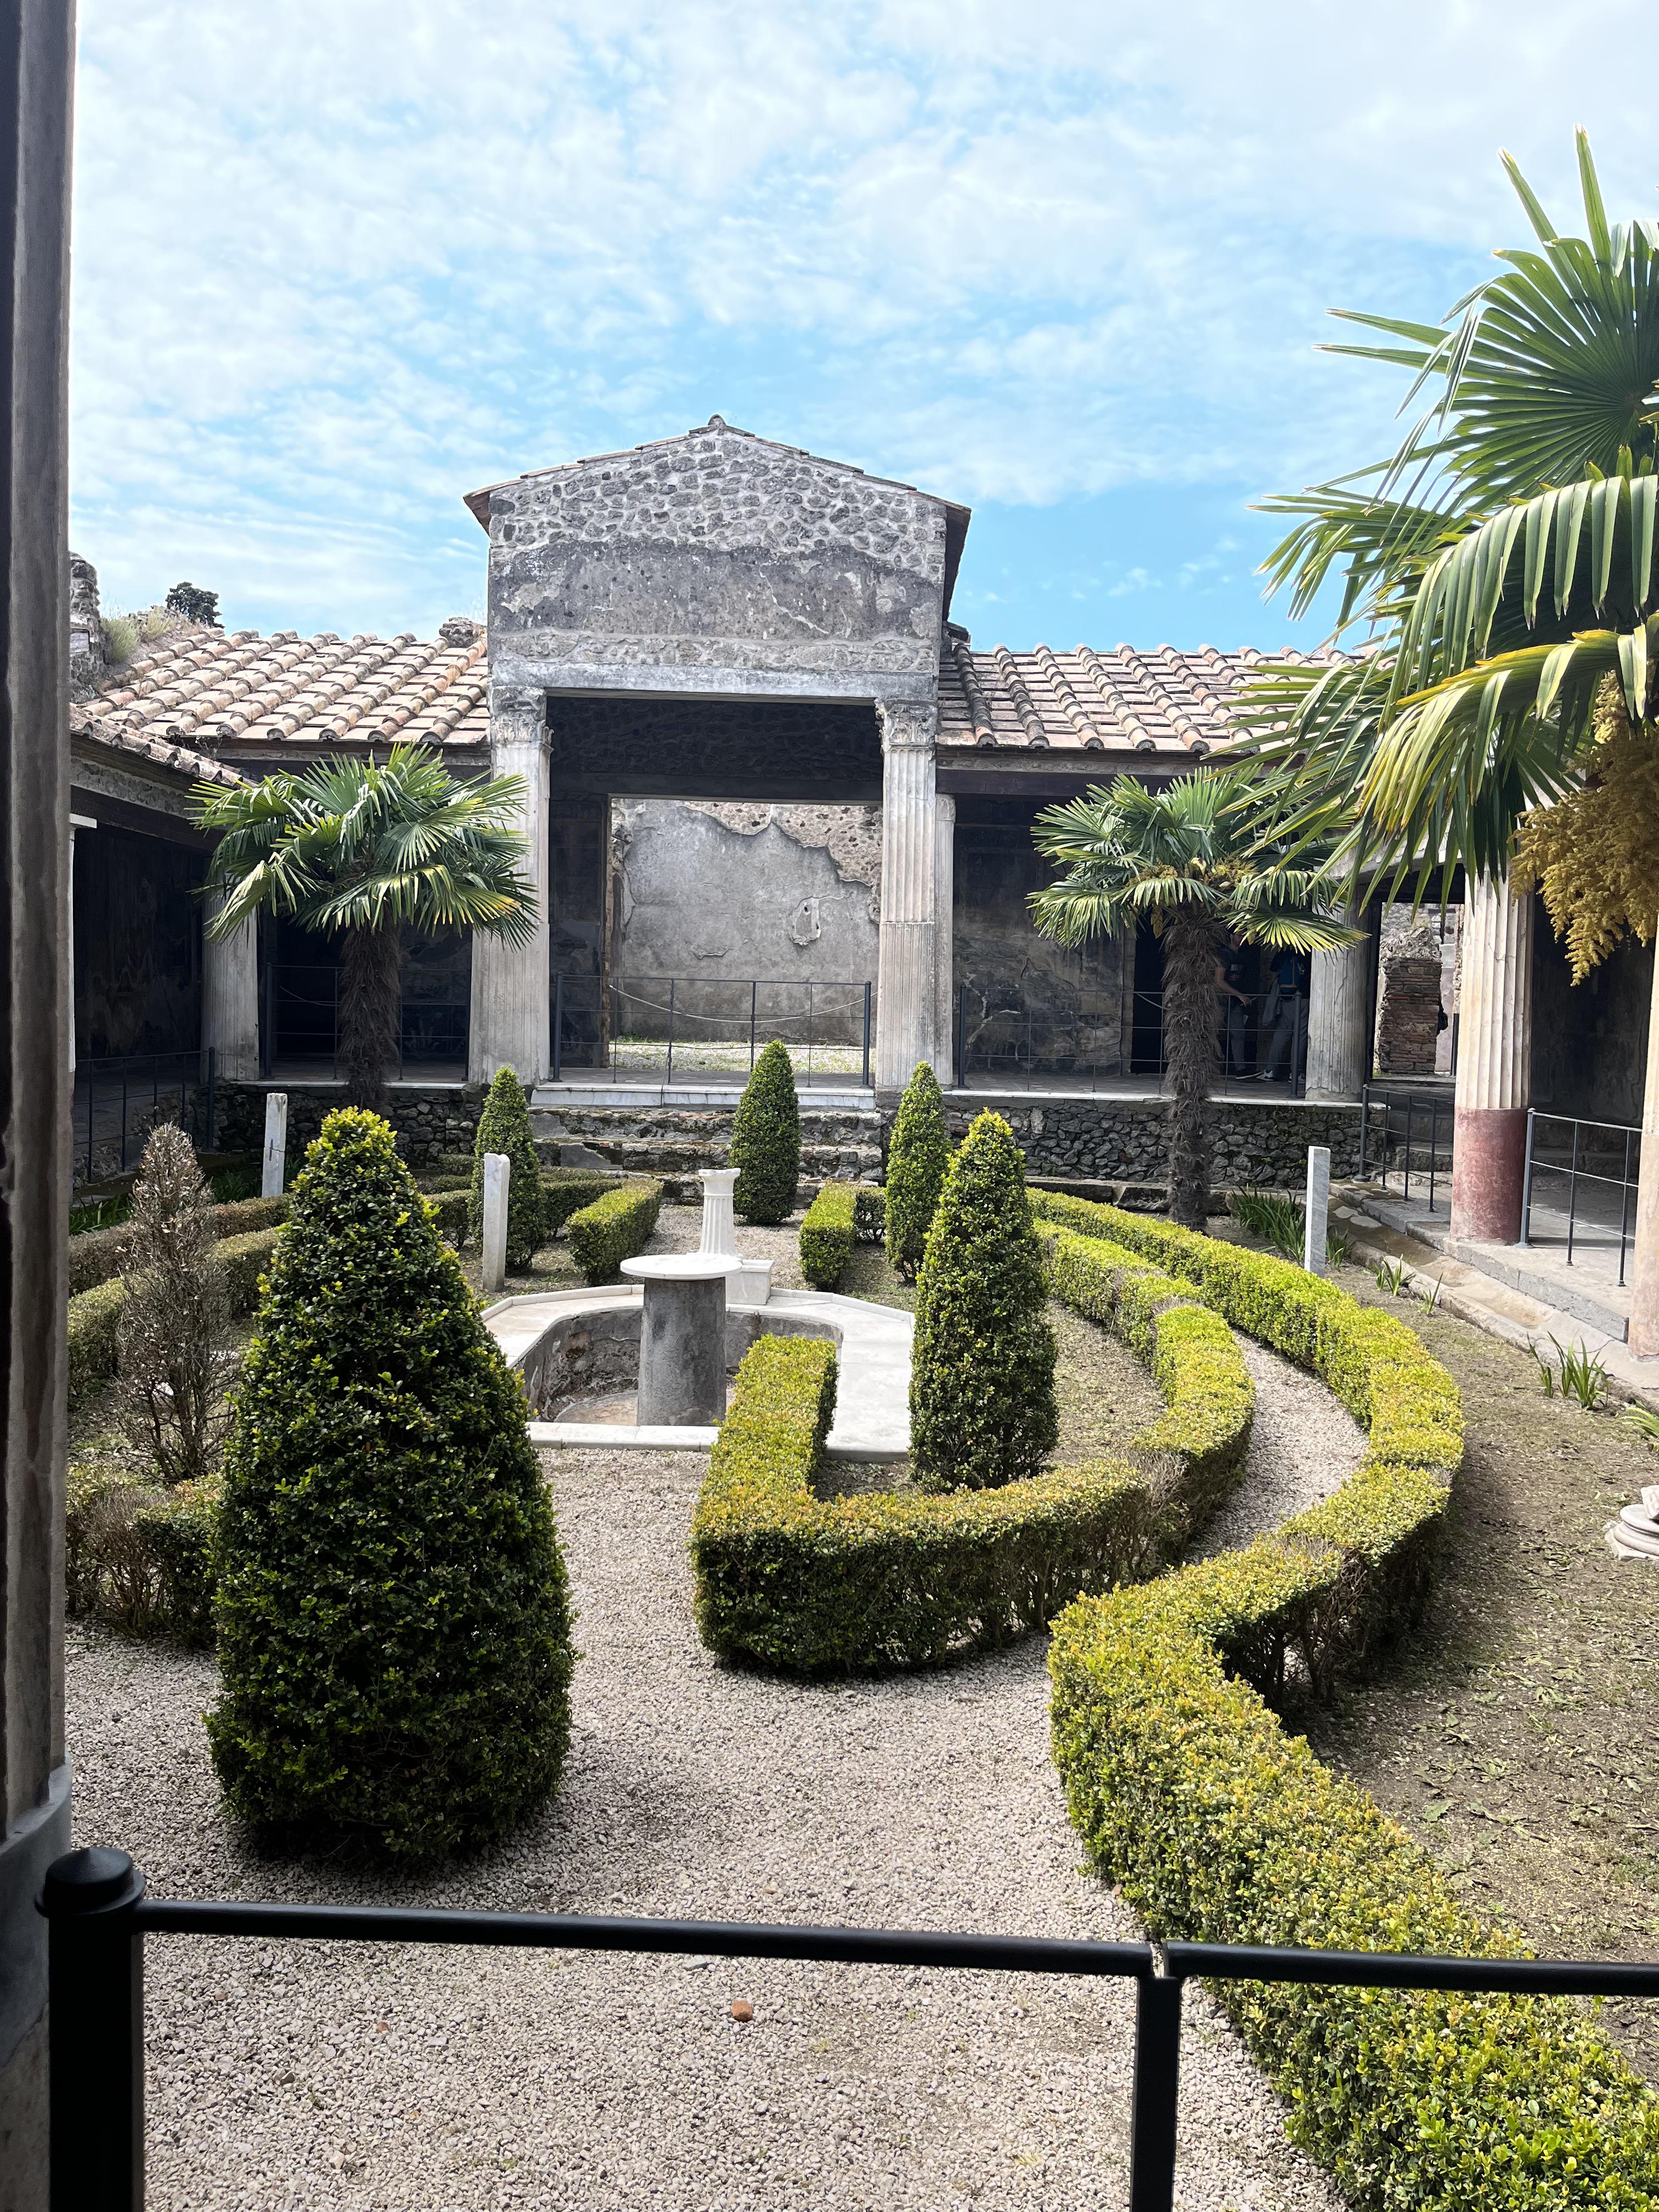 House of the Golden Cupids, Pompeii, Italy.jpeg